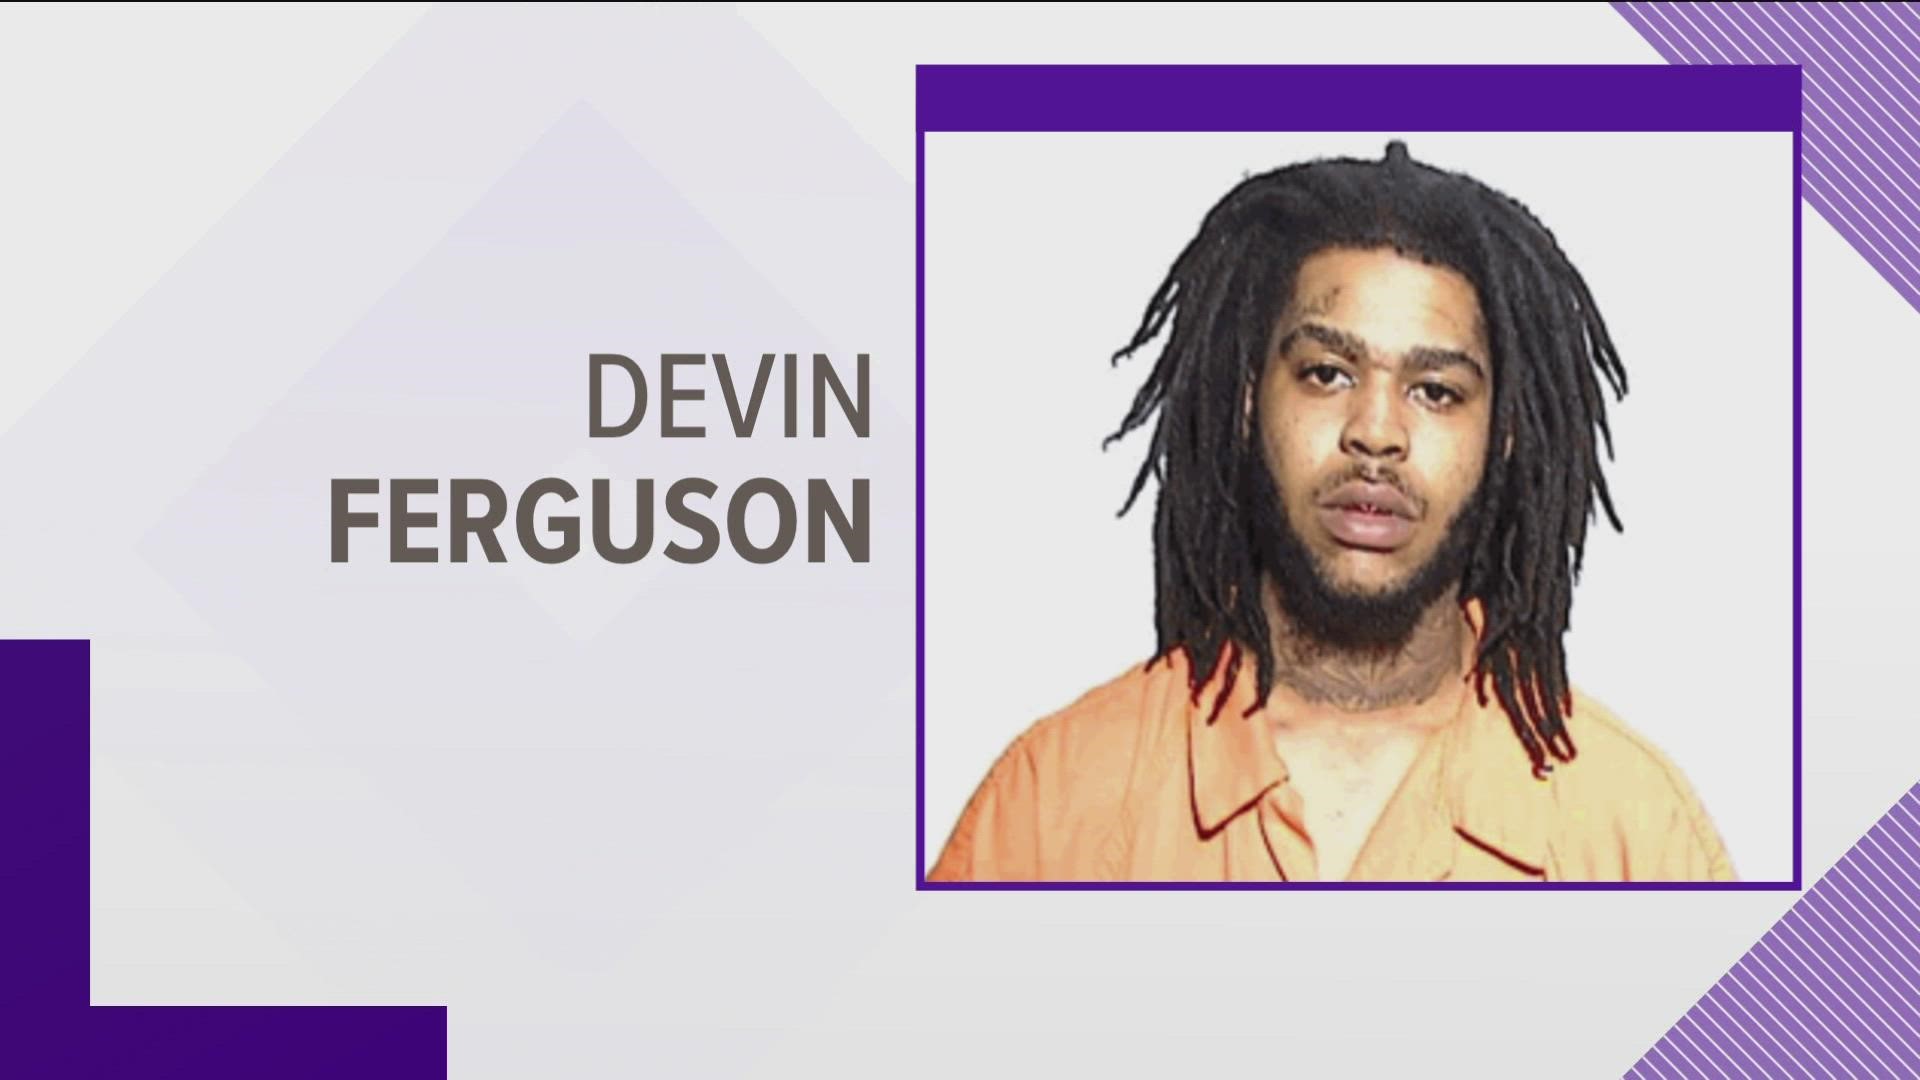 Devin Ferguson was arrested Tuesday and booked into the Lucas County Jail. He's one of three people charged in the shooting death of 24-year-old Everett White.